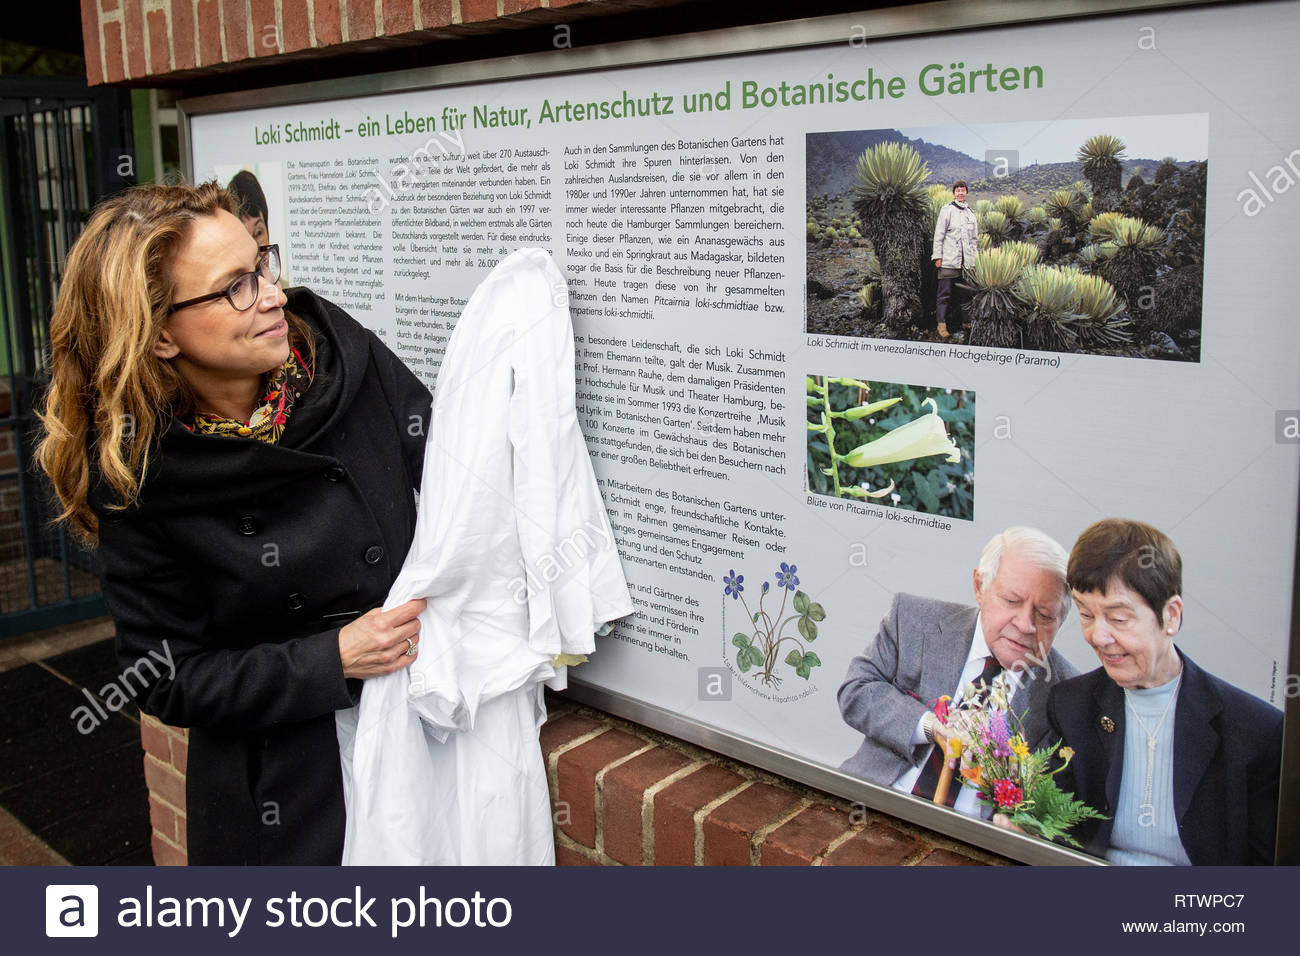 hamburg germany 03rd mar 2019 carola veit spd president of the hamburg parliament unveils a memorative plaque in honour of hamburgs honorary citizen loki schmidt who d in 2010 in the botanical garden a birthday matinee was held to memorate the life of schmidt as a conservationist who would have turned 100 on 03 march 2019 credit axel heimkendpaalamy live news RTWPC7